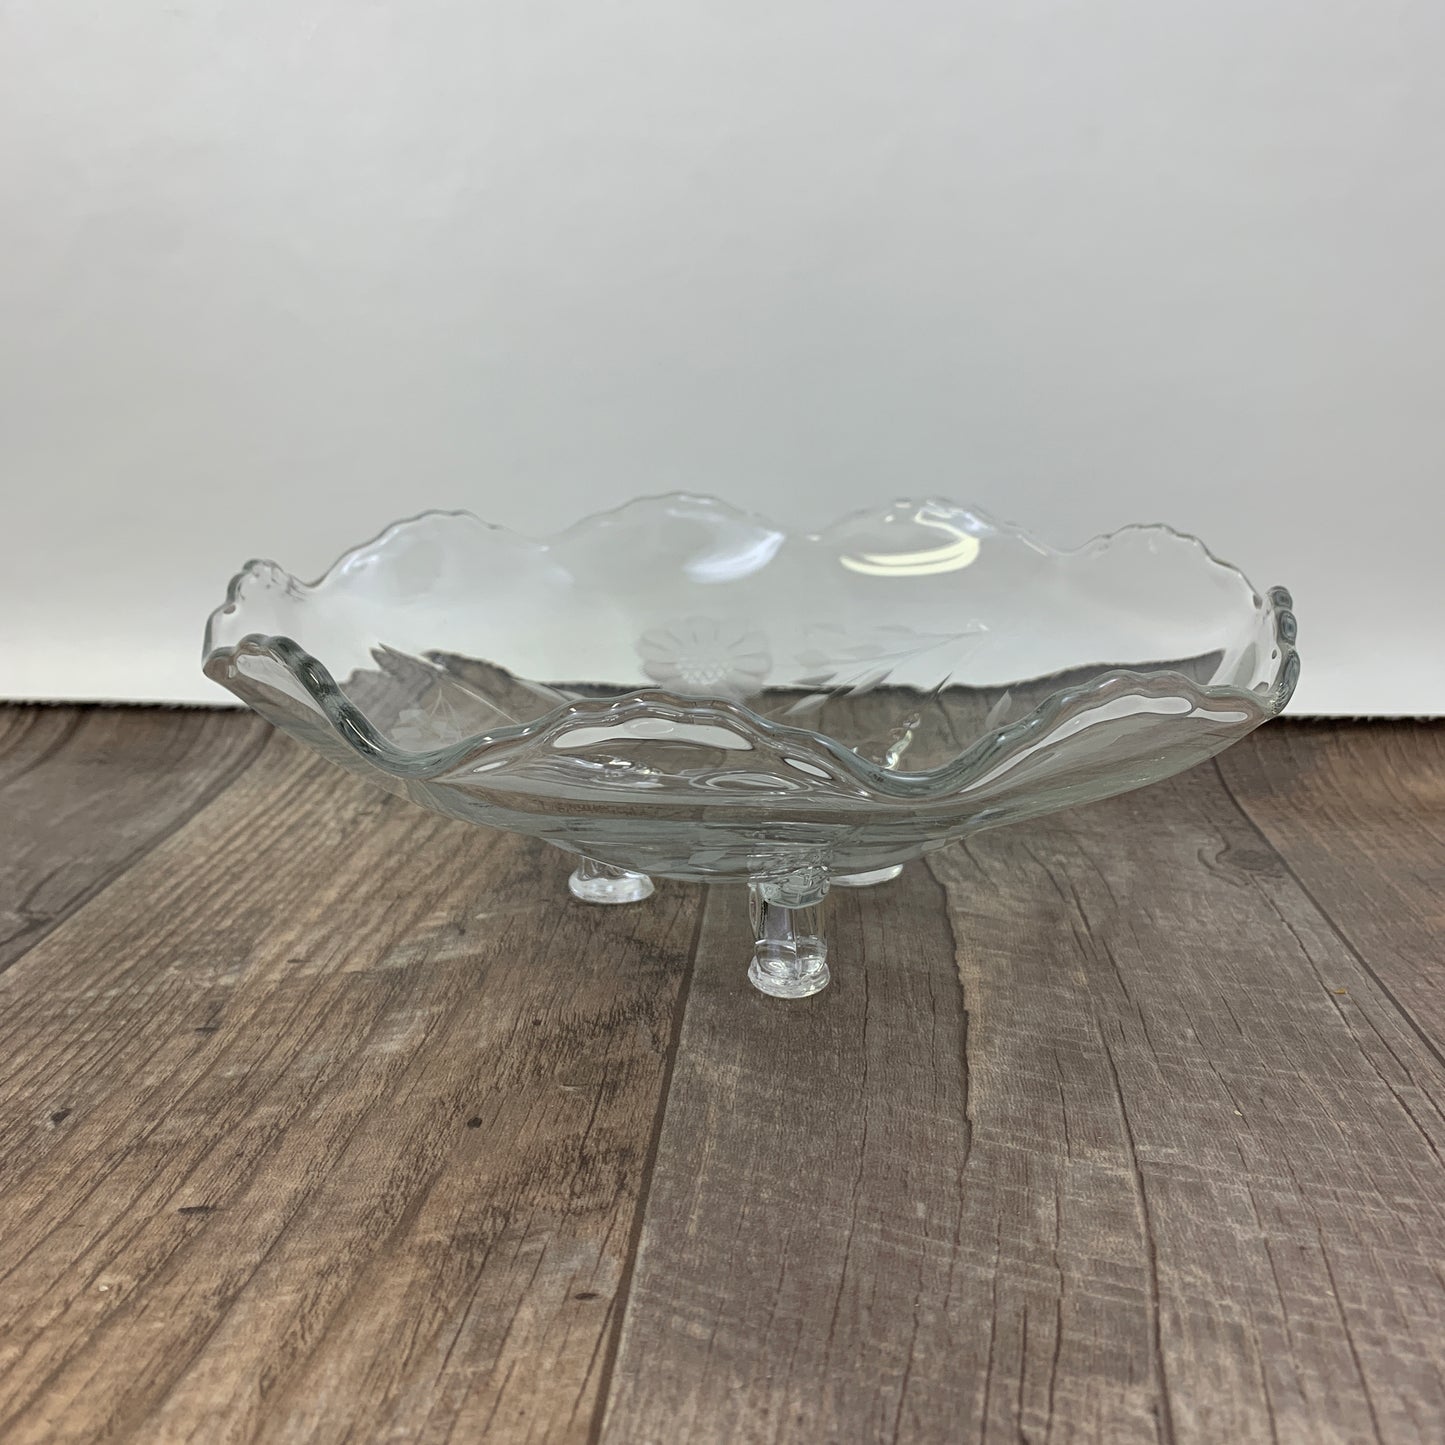 Vintage Cornflower Dish, 3 Footed Candy Dish Low Candy Dish with Ruffled Edge